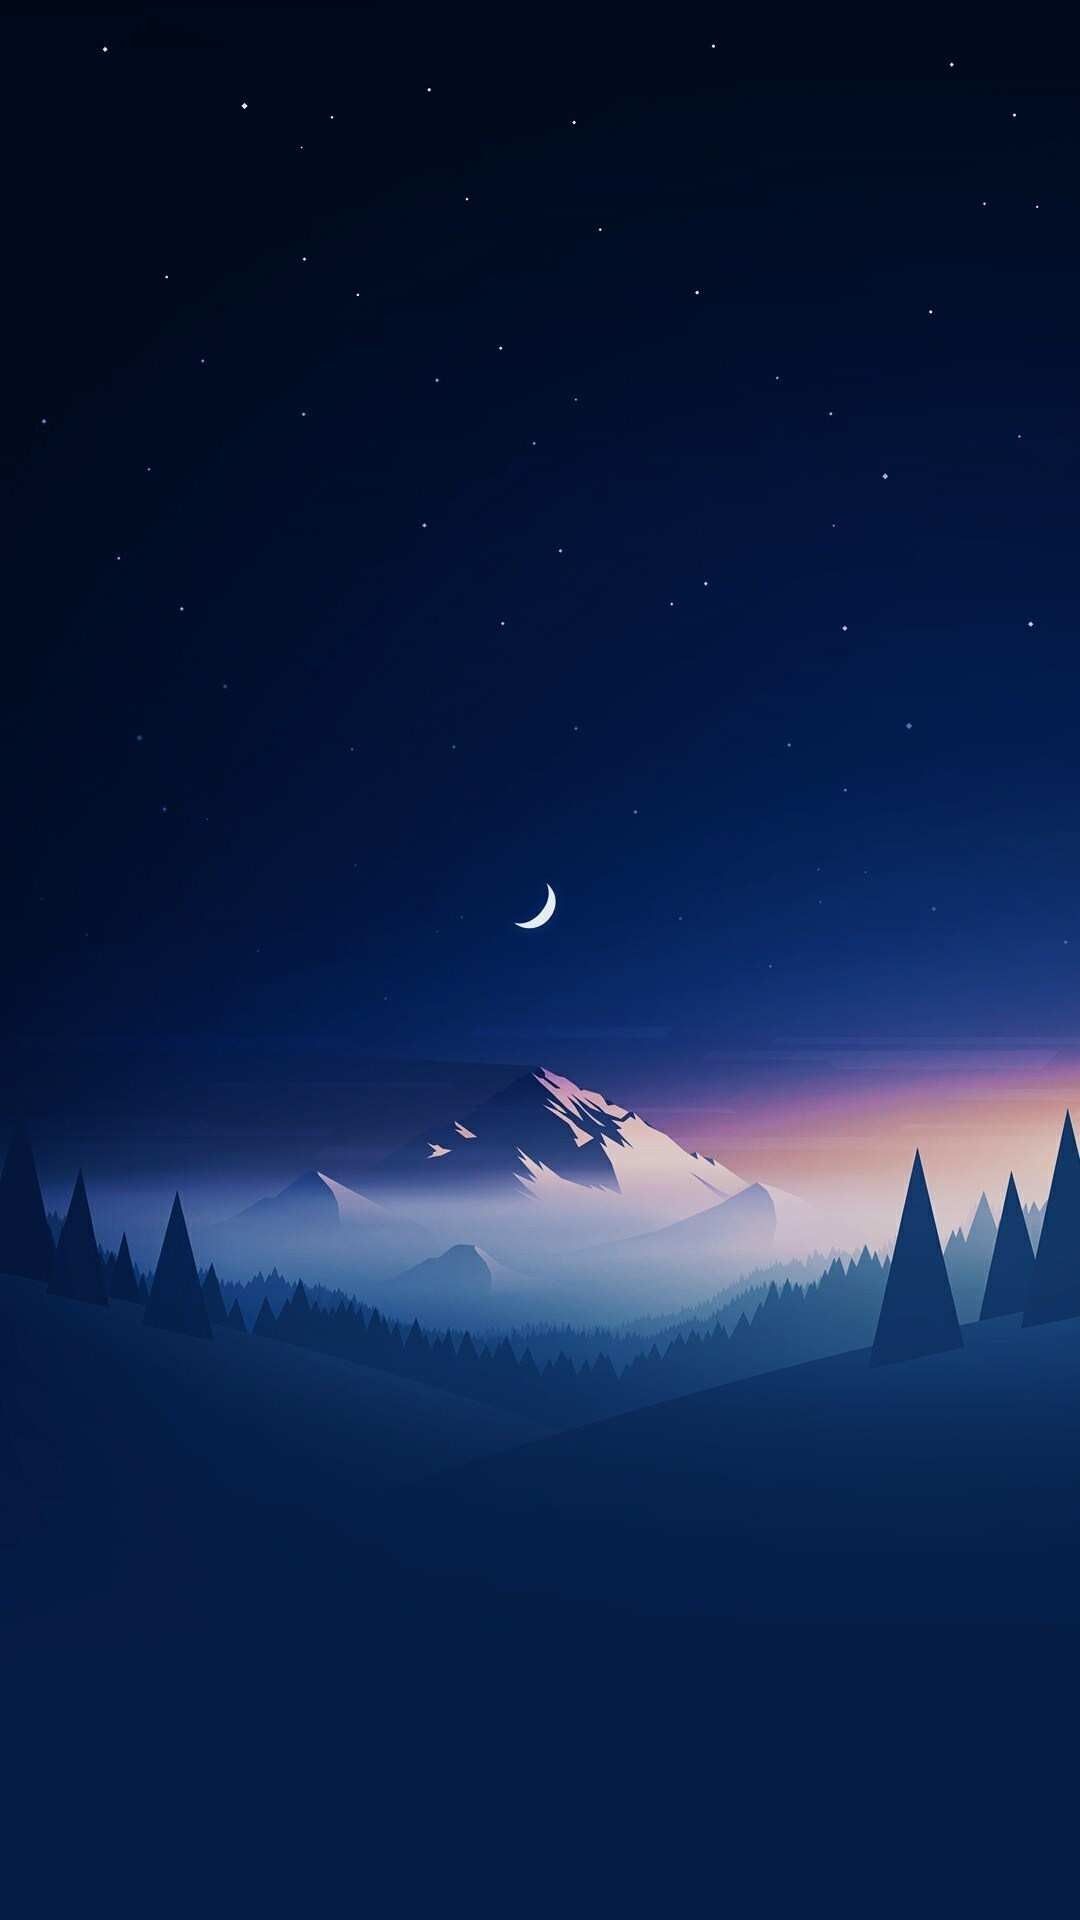 Pin on Pretty wallpapers